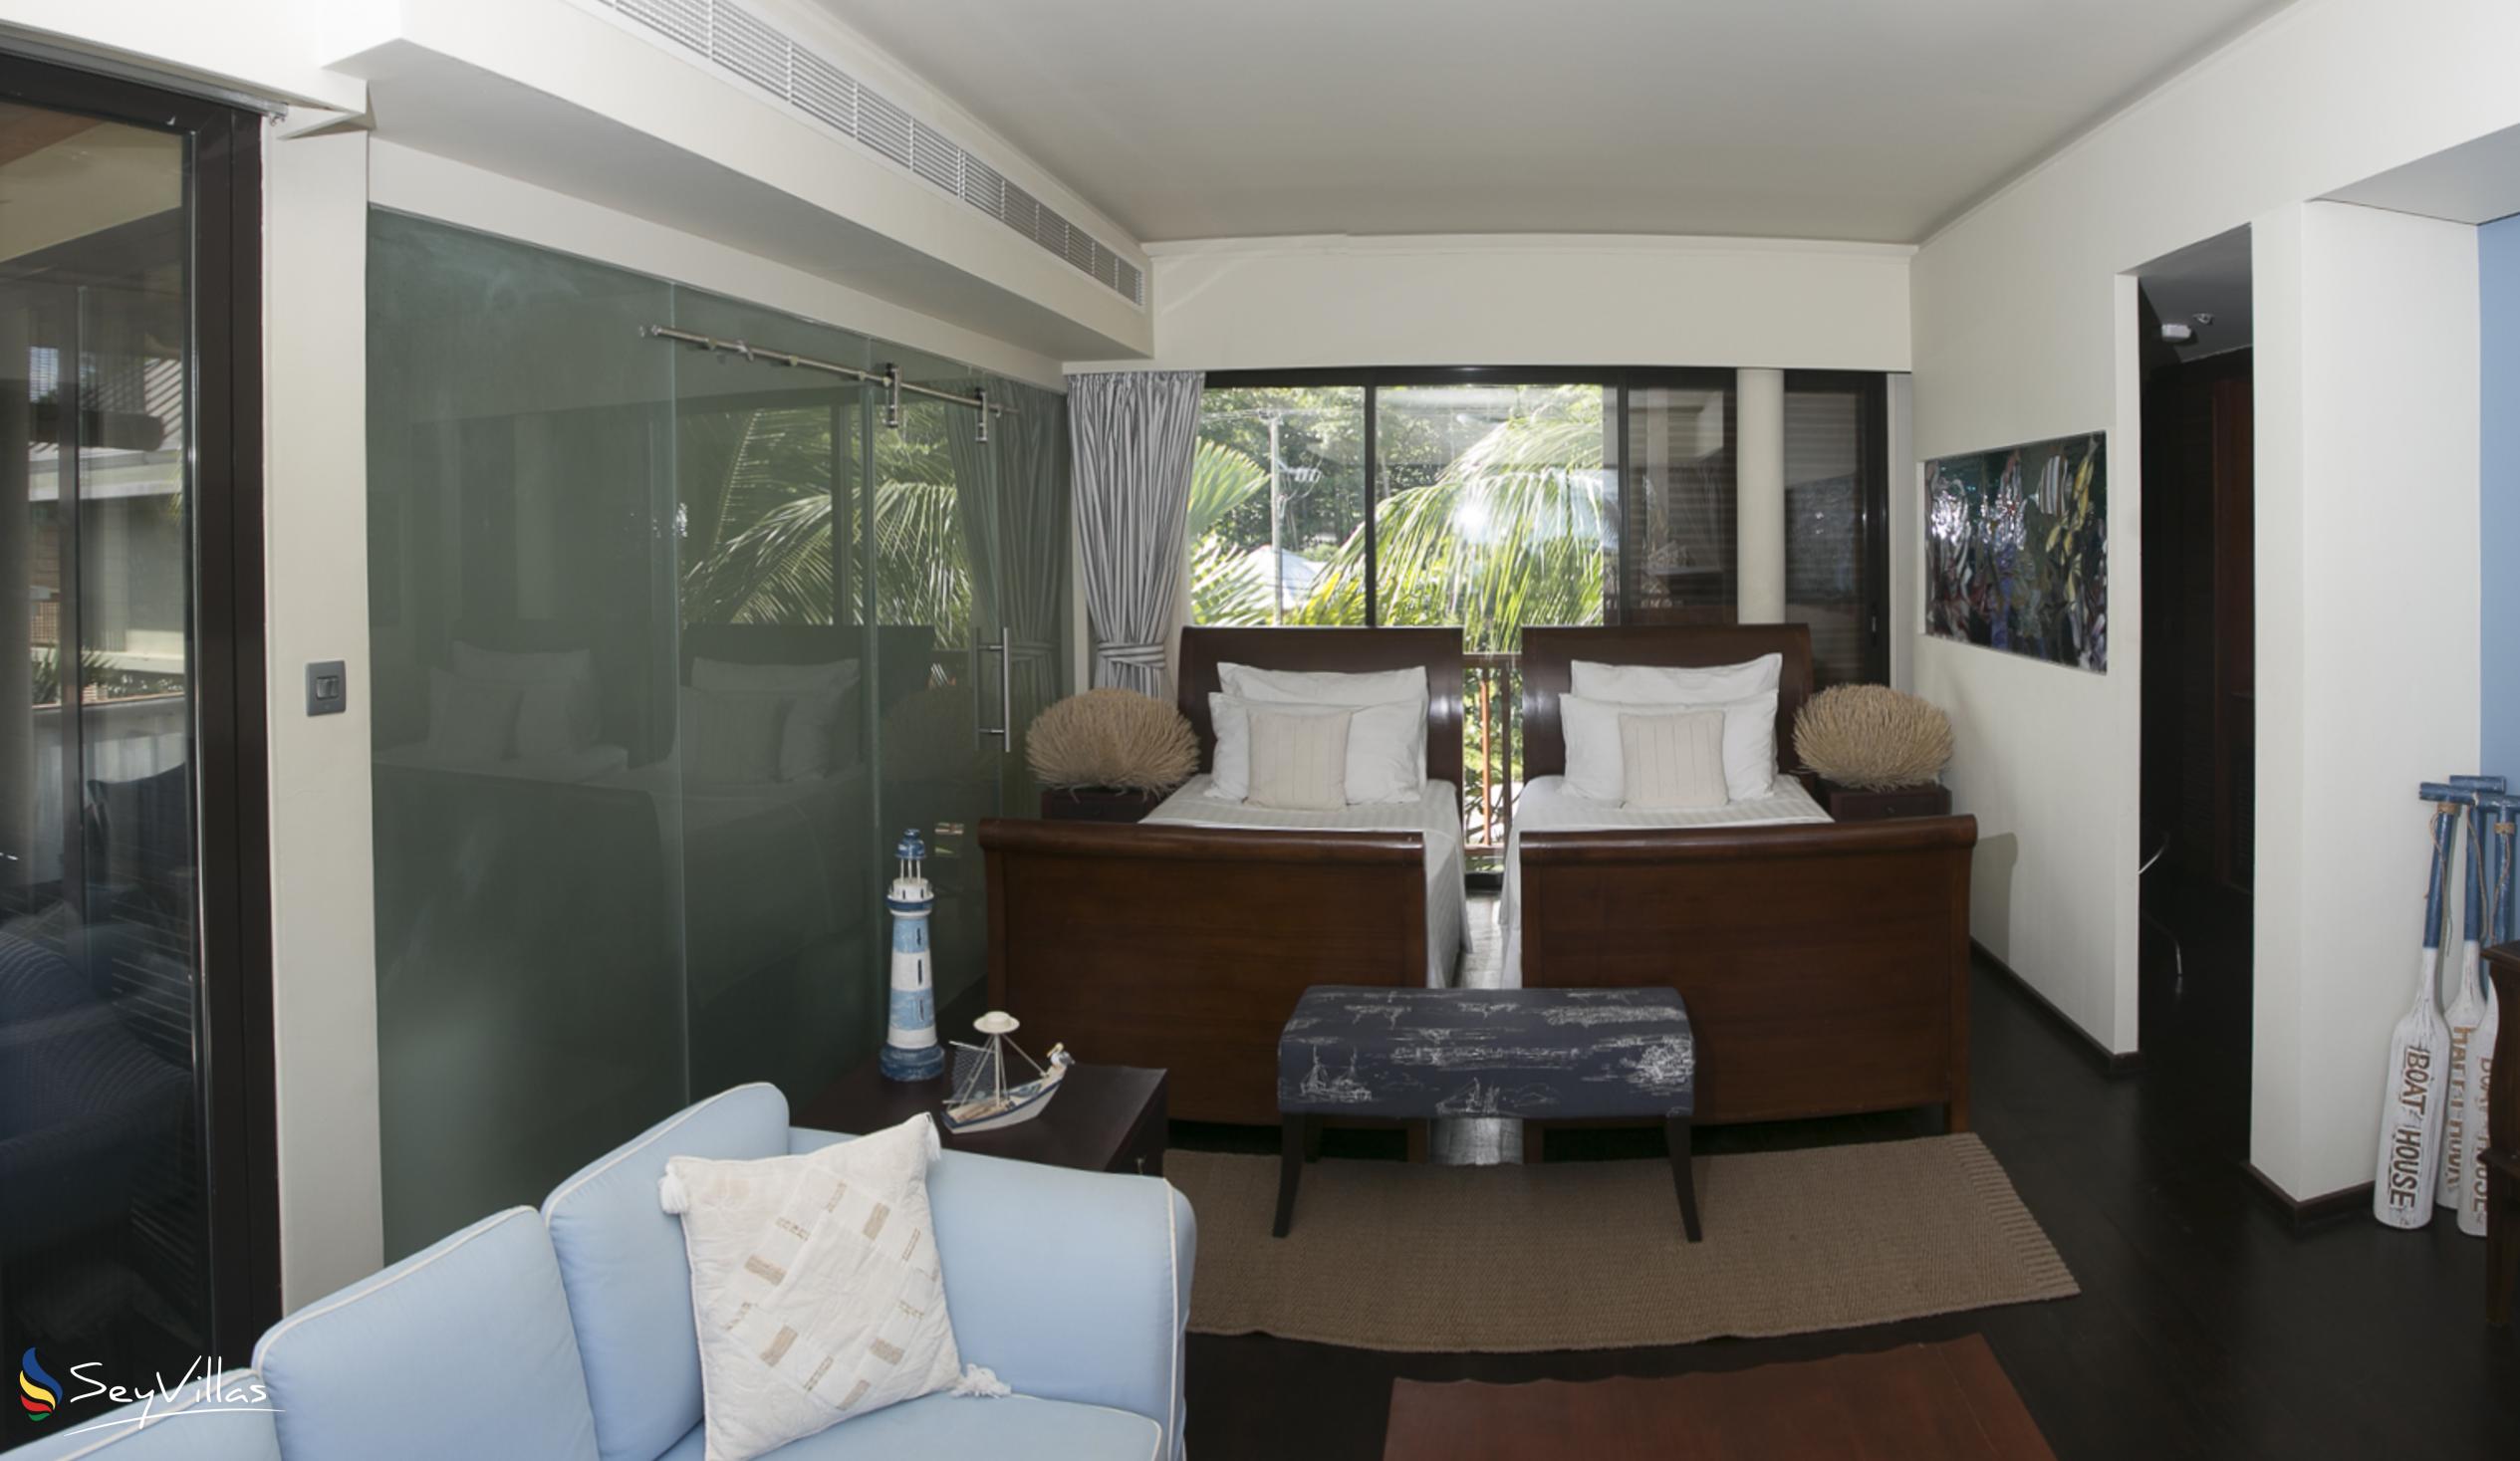 Photo 81: Dhevatara Beach Hotel - Sea View Suite with Twin Bed - Praslin (Seychelles)